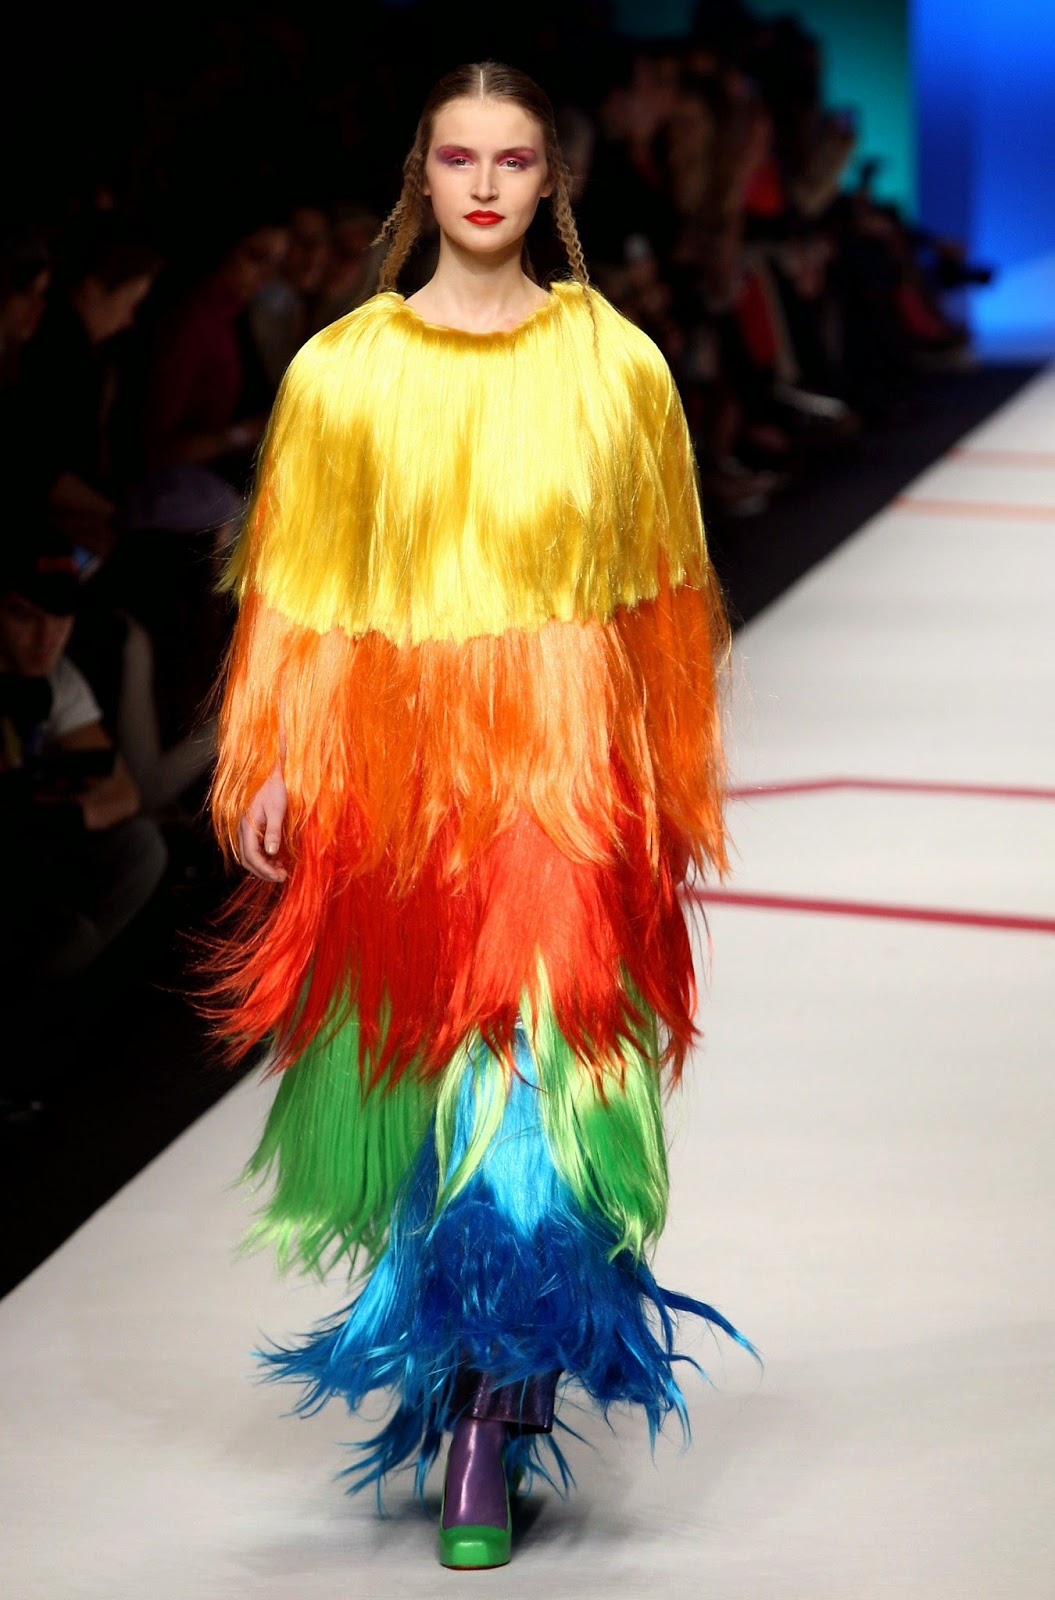 Weird and Ugly Fashion of 2014 | Fashionate Trends